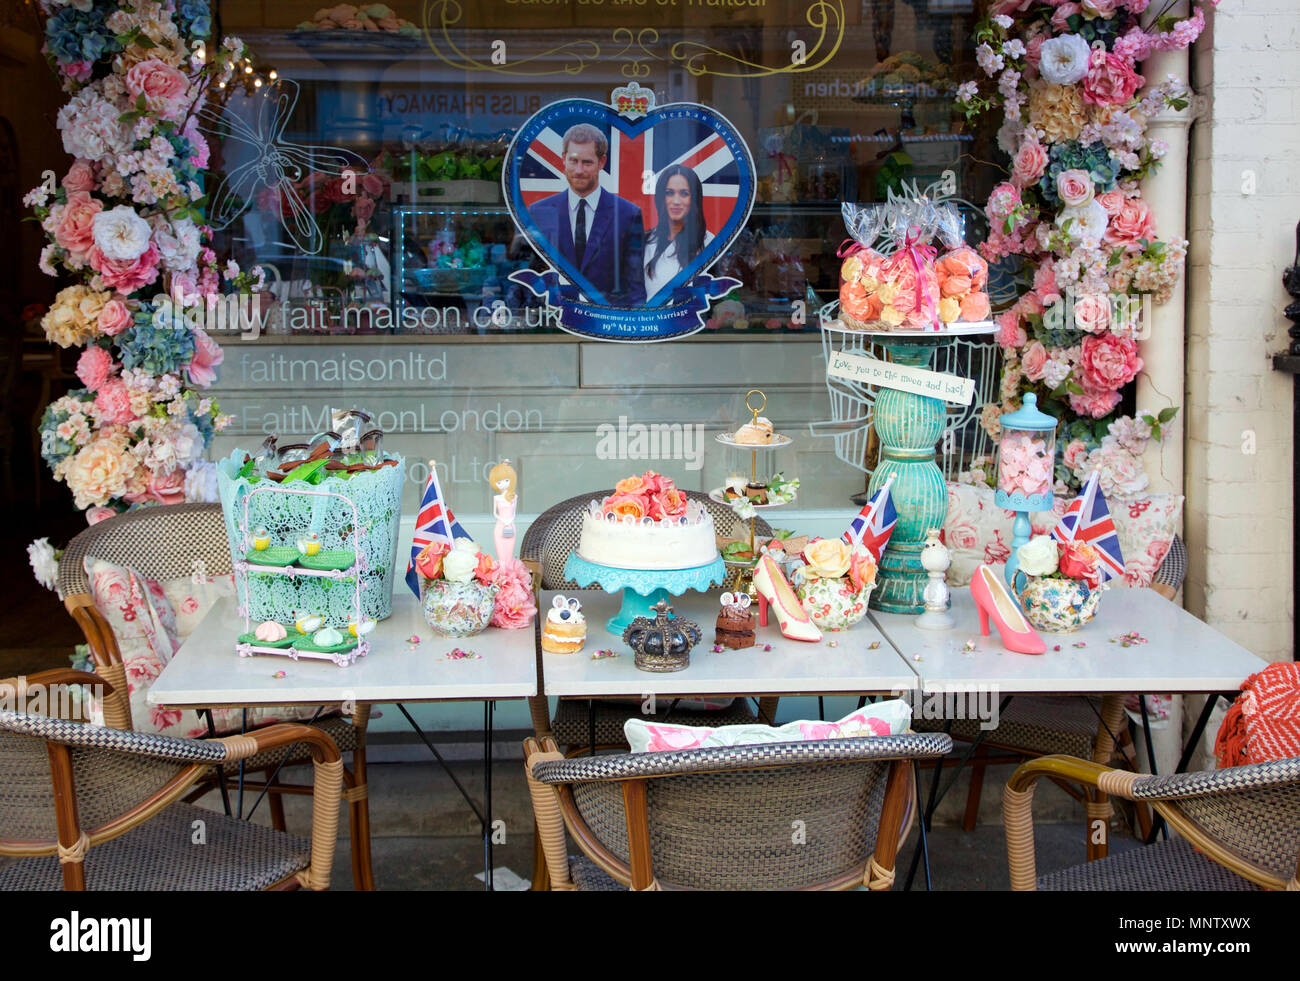 Fait Maison, Gloucester Road patisserie celebrates the Wedding of Harry and Meghan Stock Photo